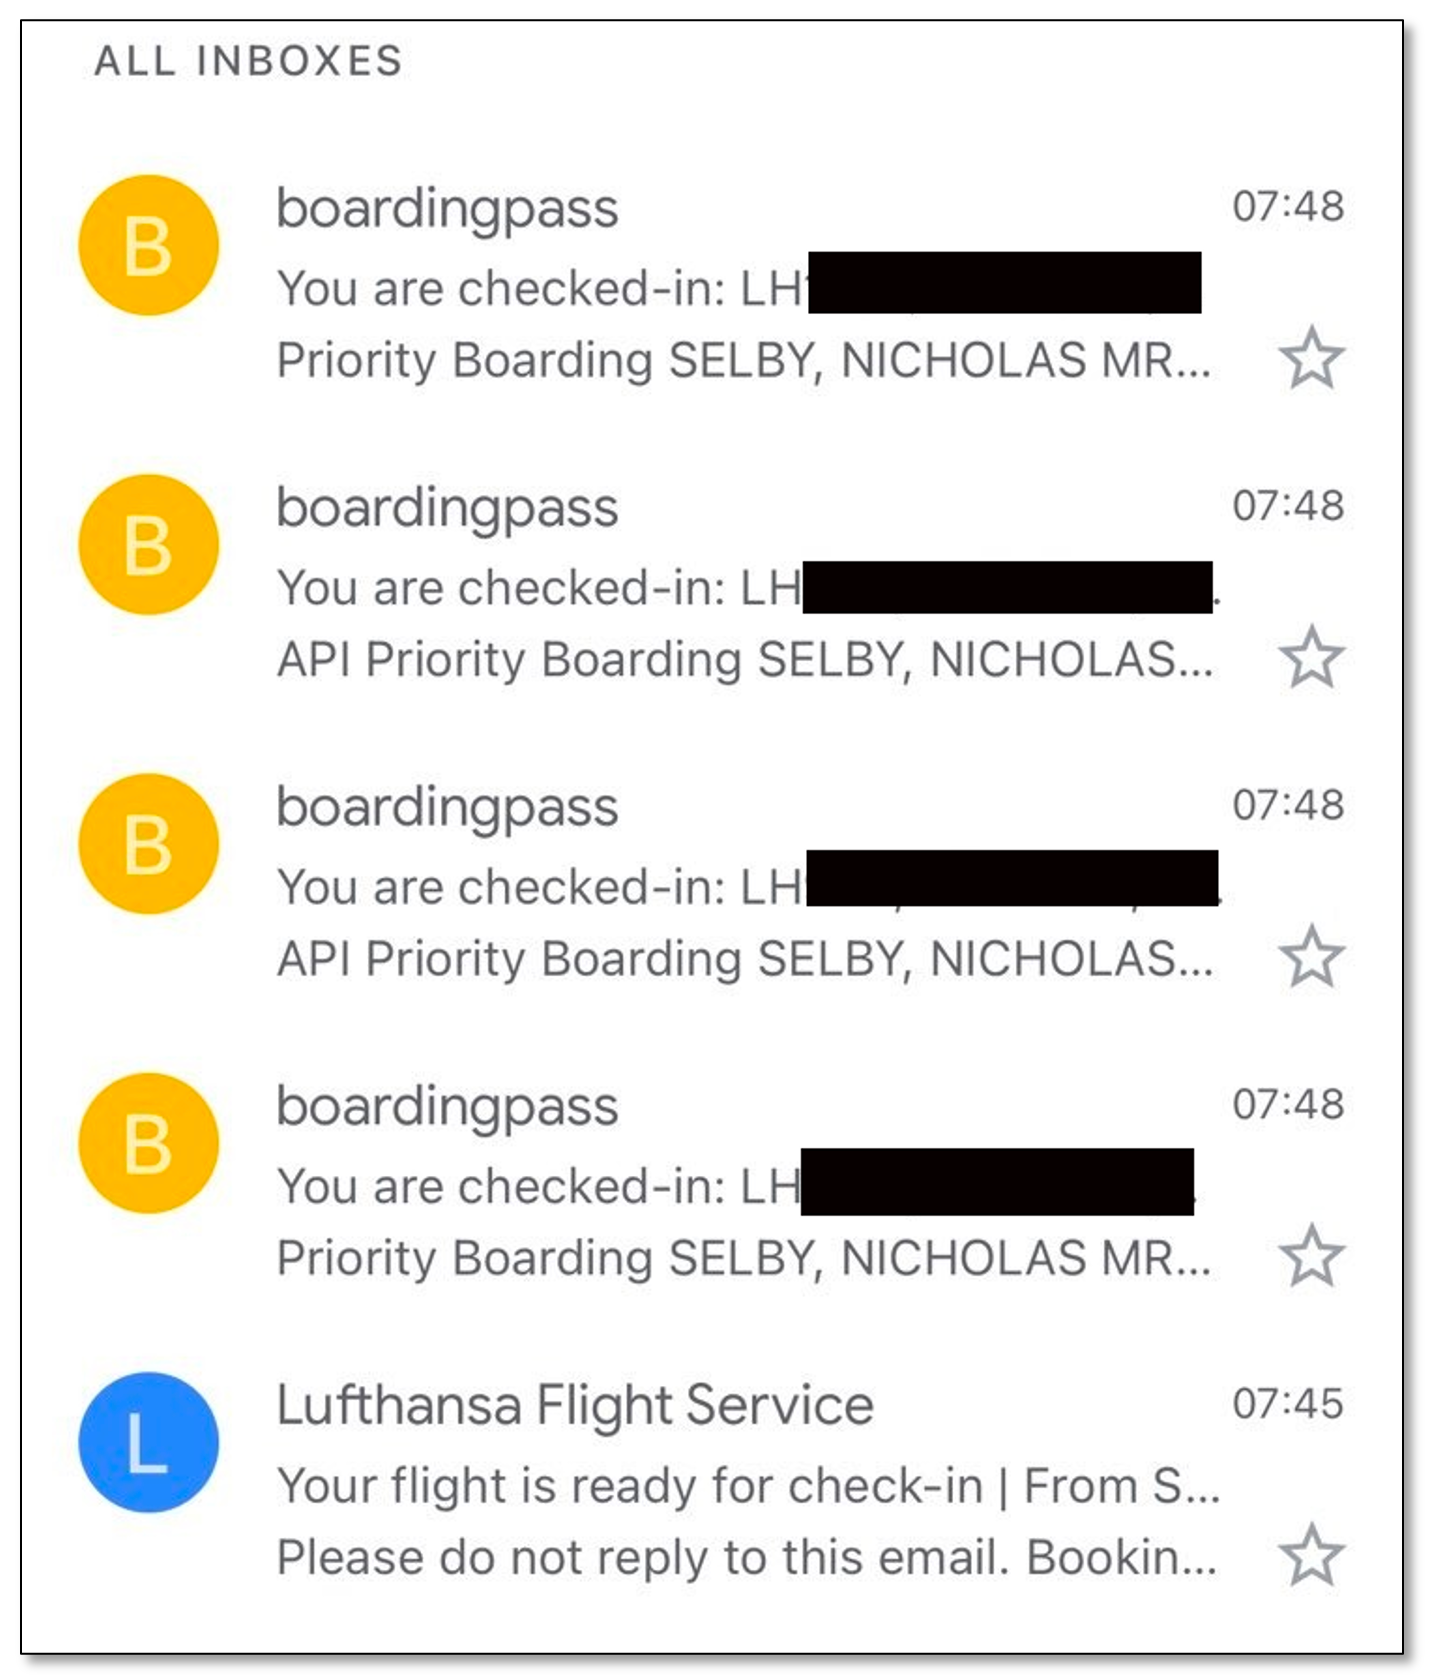 repeated boarding pass emails, one for each leg of a flight.